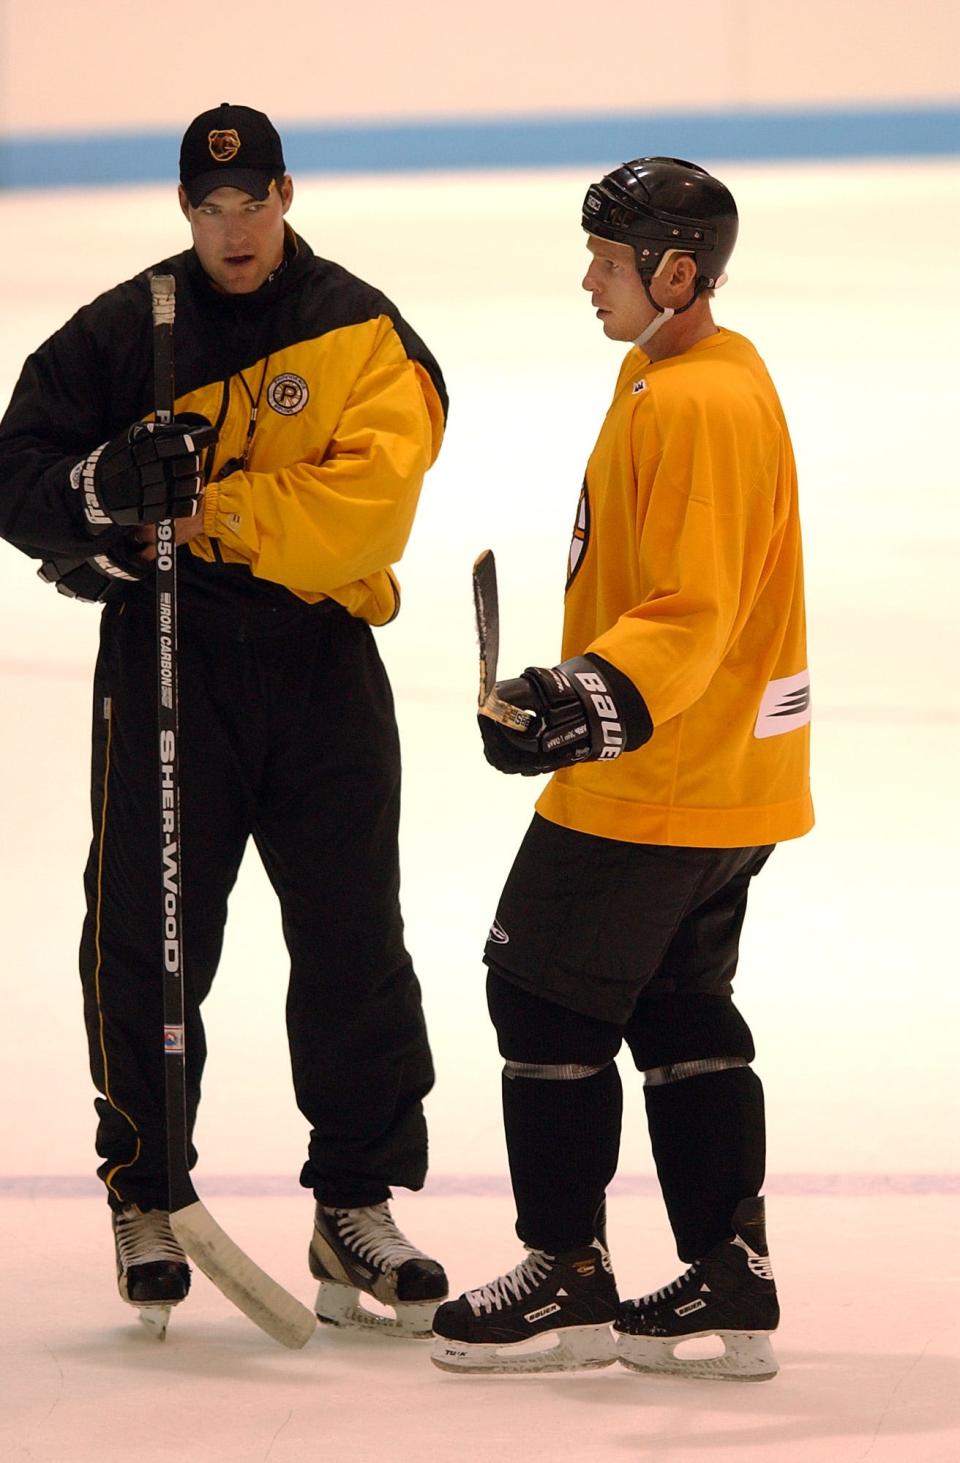 Then-head coach of the Providence Bruins, Bill Armstrong, left, talking with player Ben Carpentier during a 2001 practice.